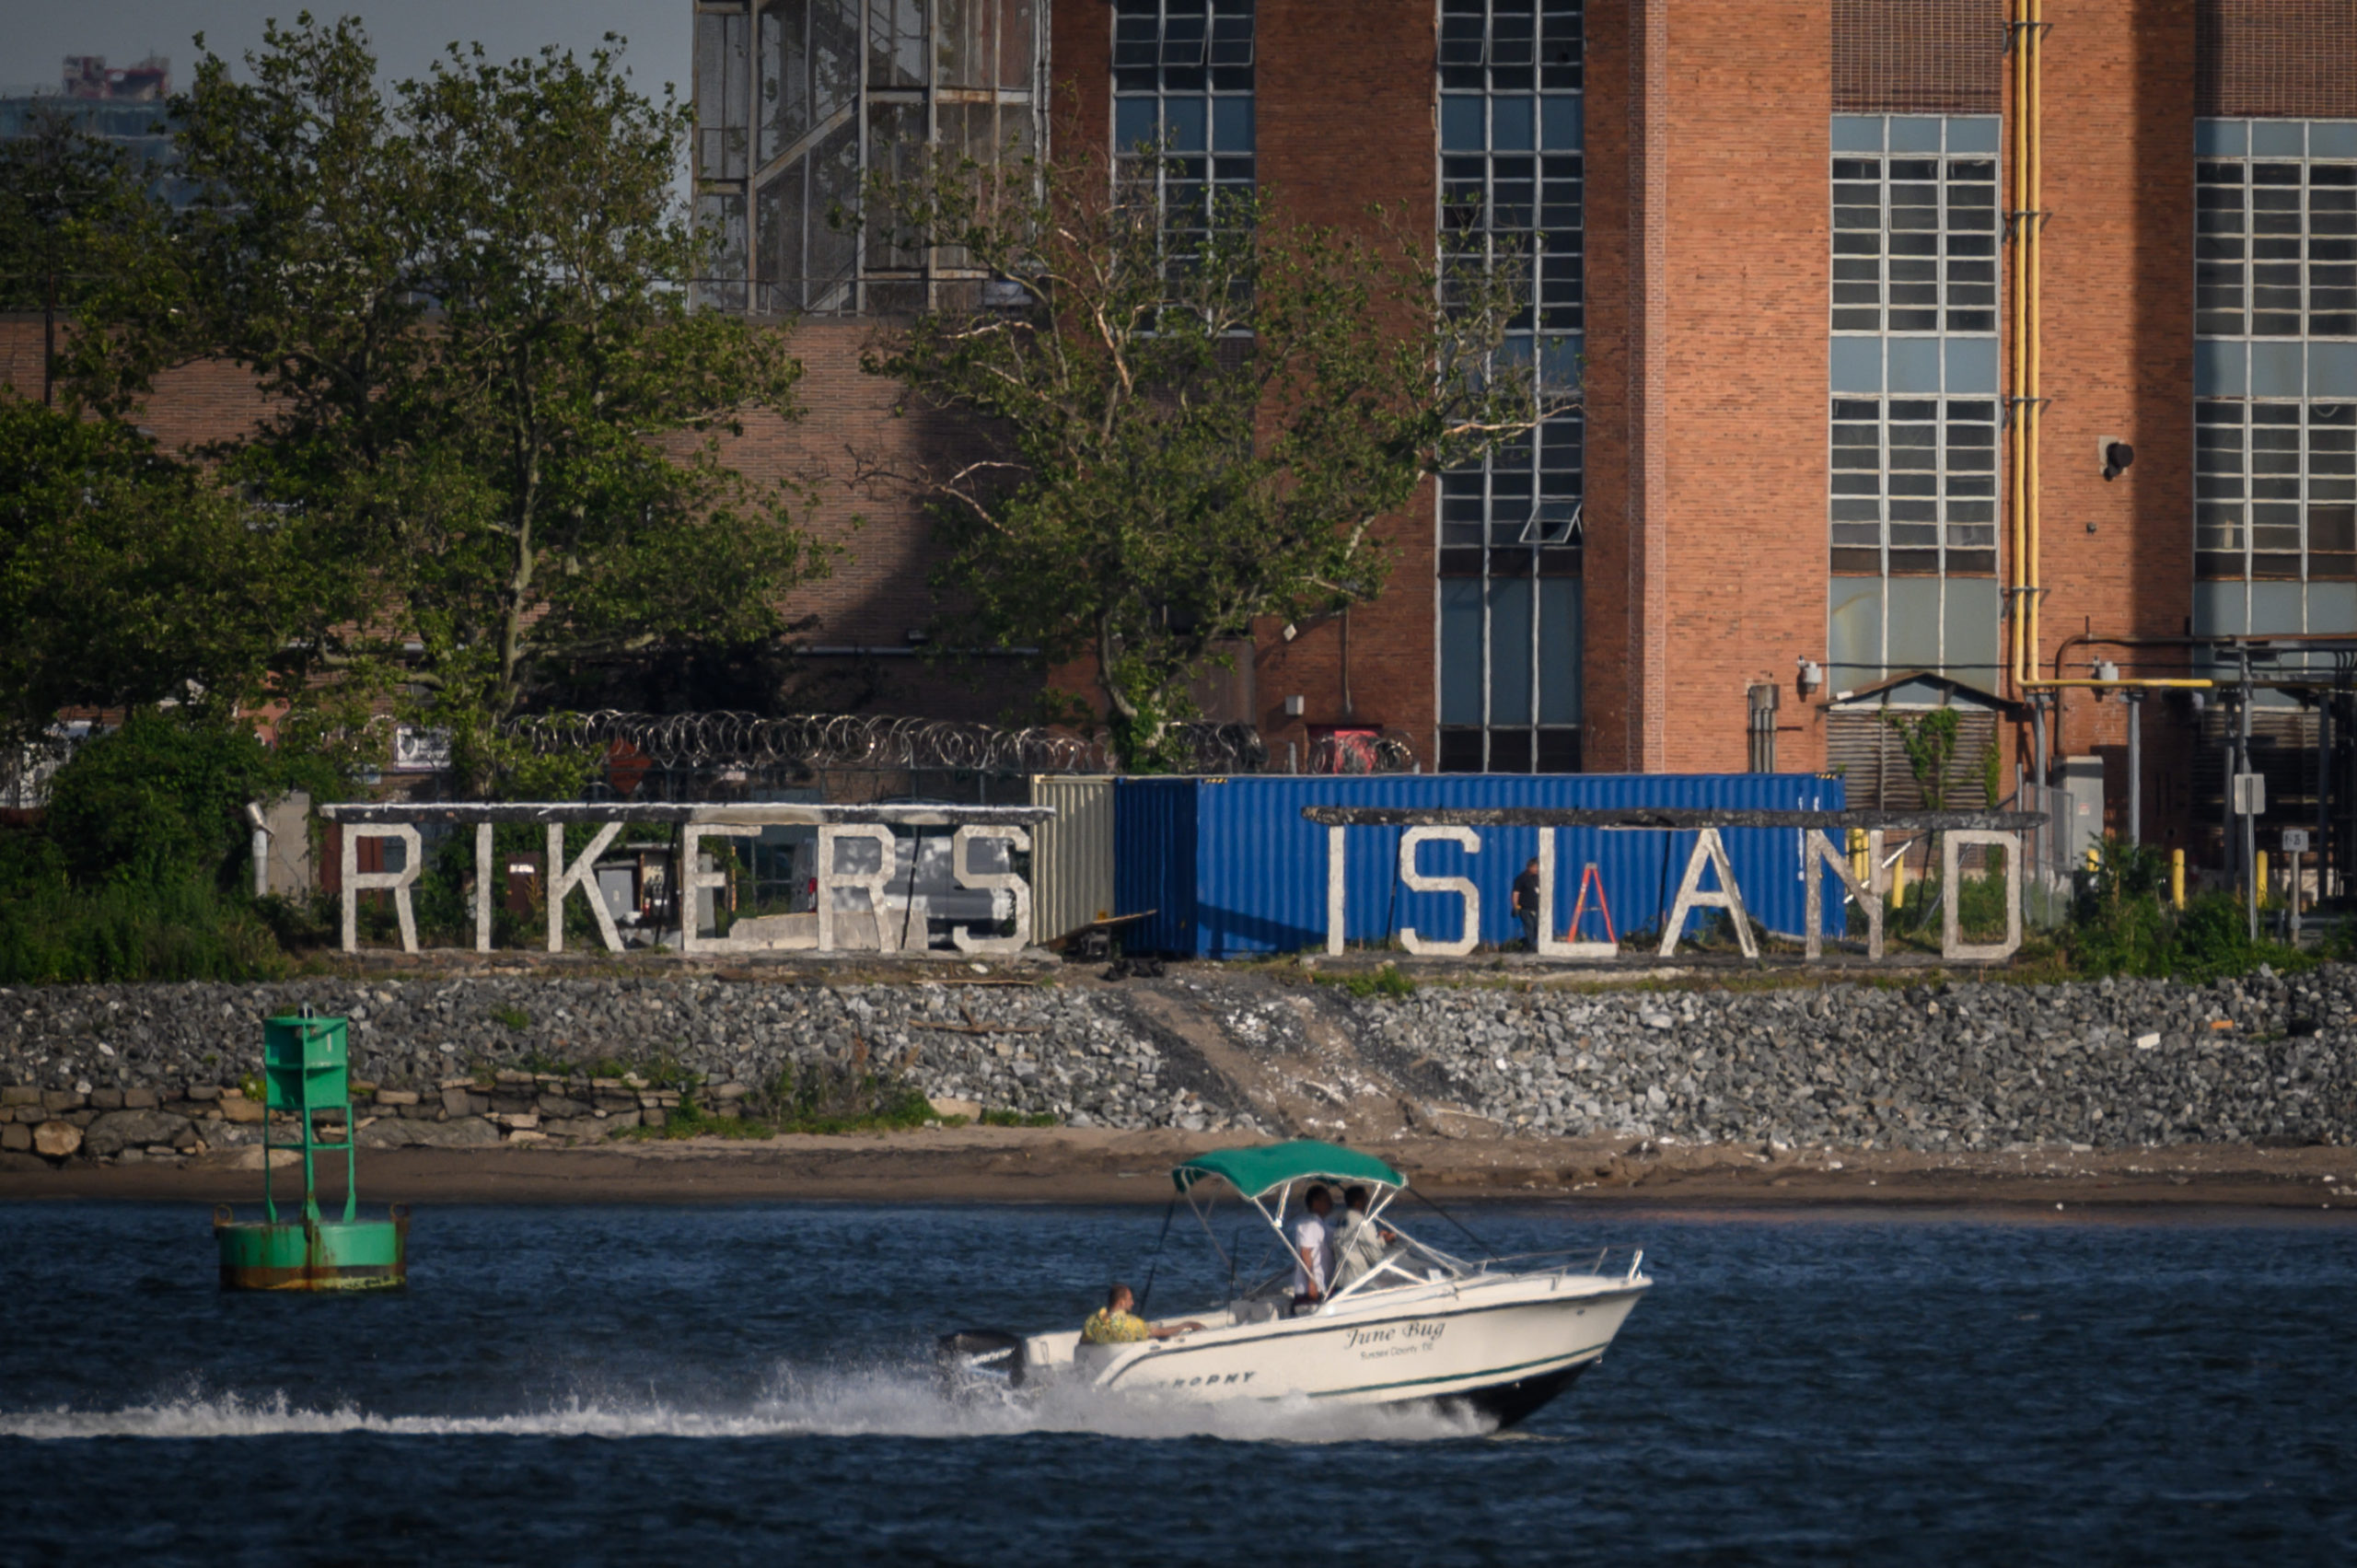 A general view shows the Rikers Island facility on June 6, 2022. (Photo by Ed JONES / AFP) (Photo by ED JONES/AFP via Getty Images)